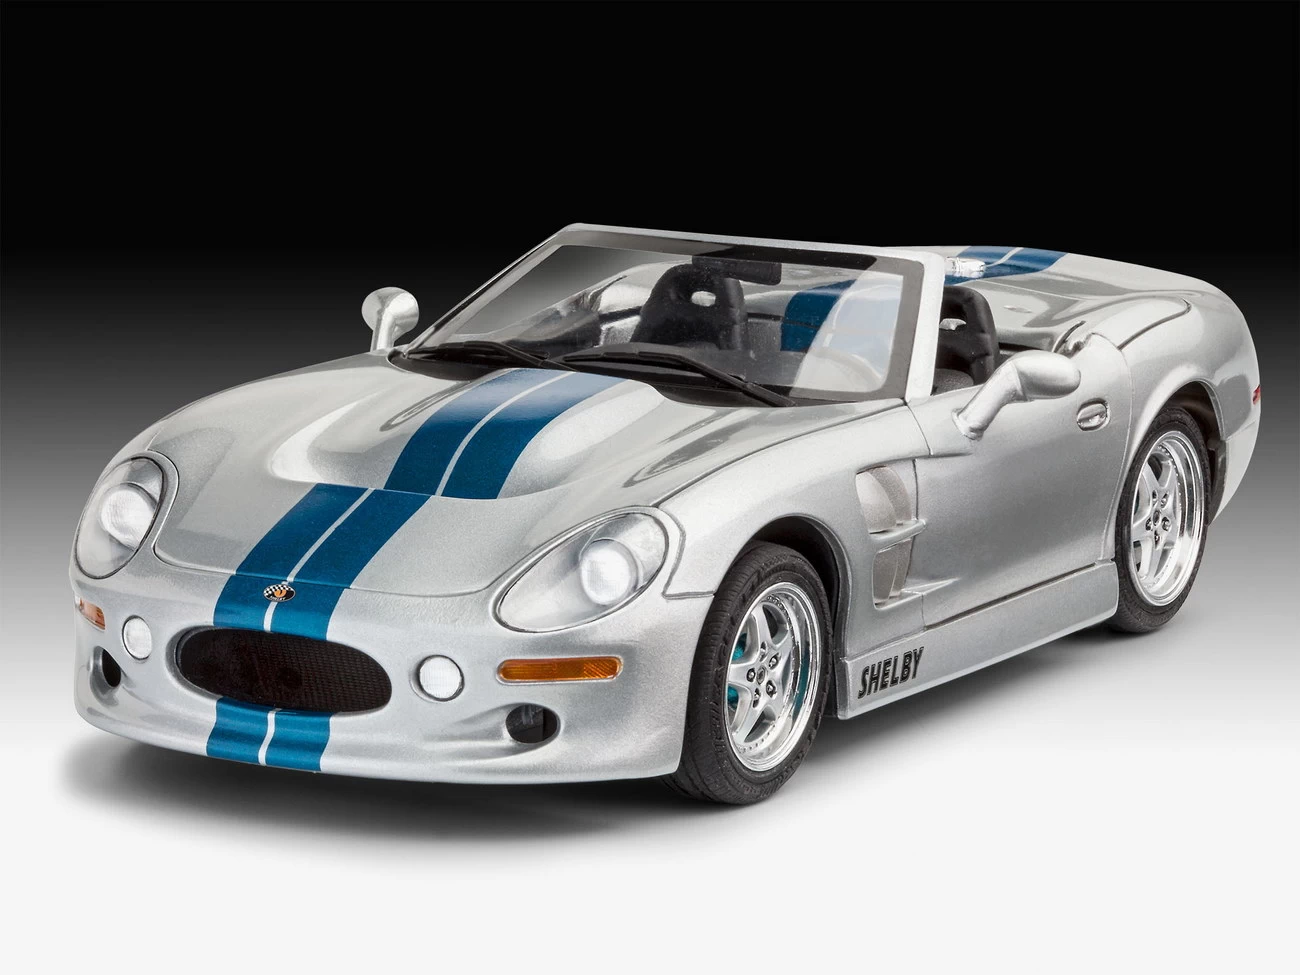 Shelby Series 1 (07039)